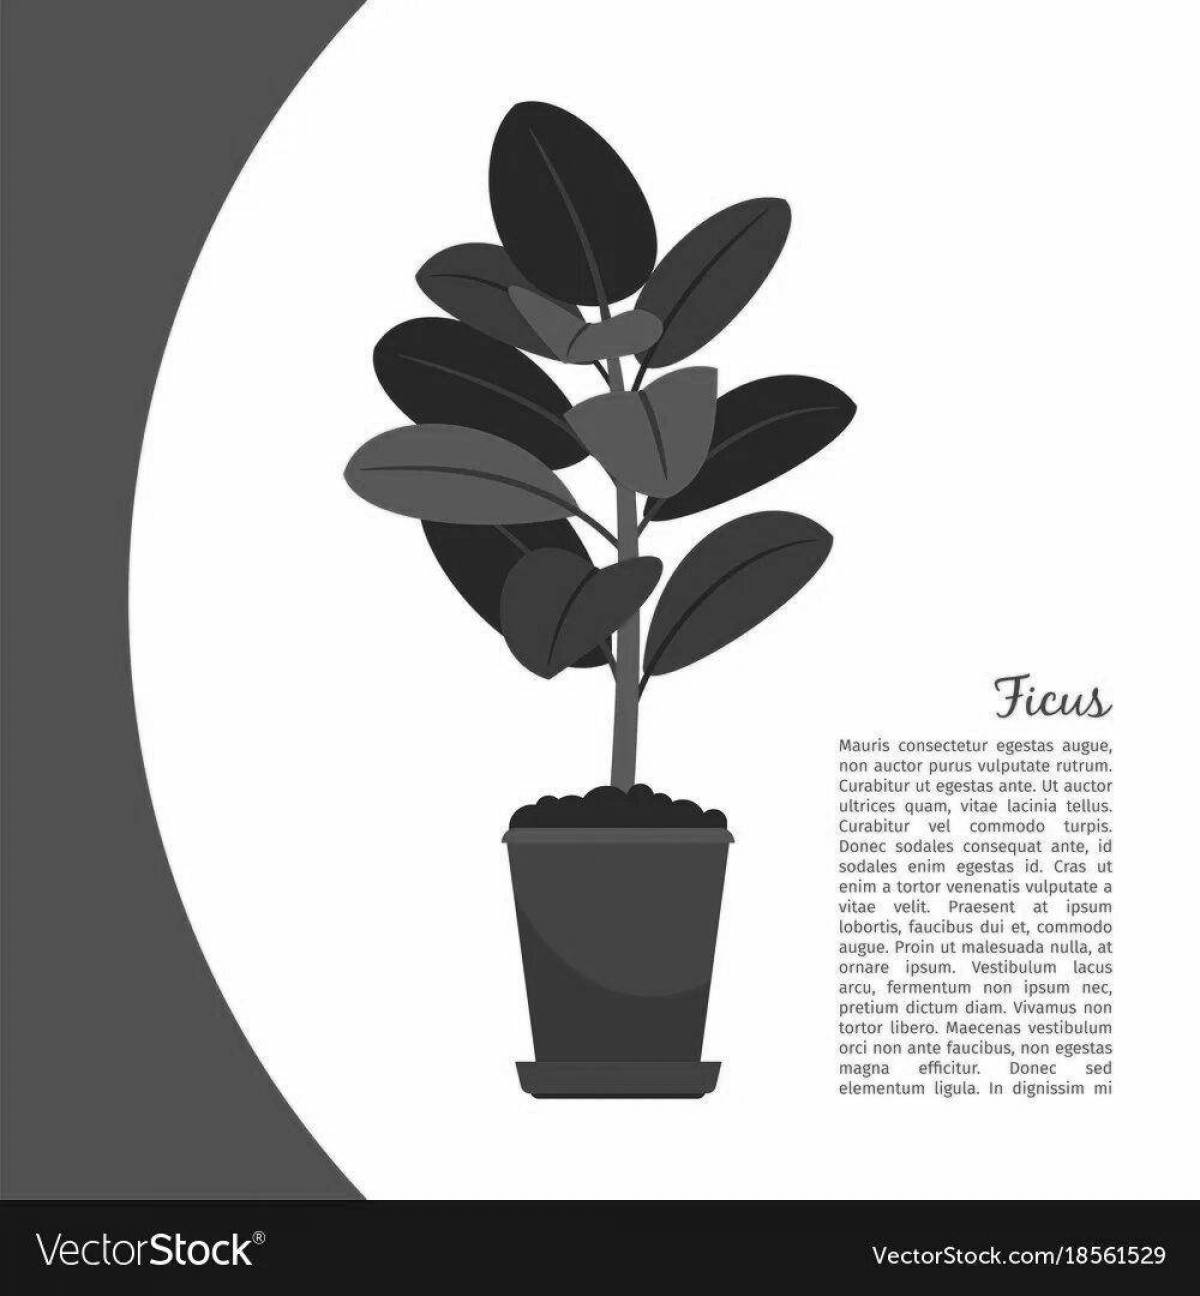 Stimulating ficus coloring book for babies